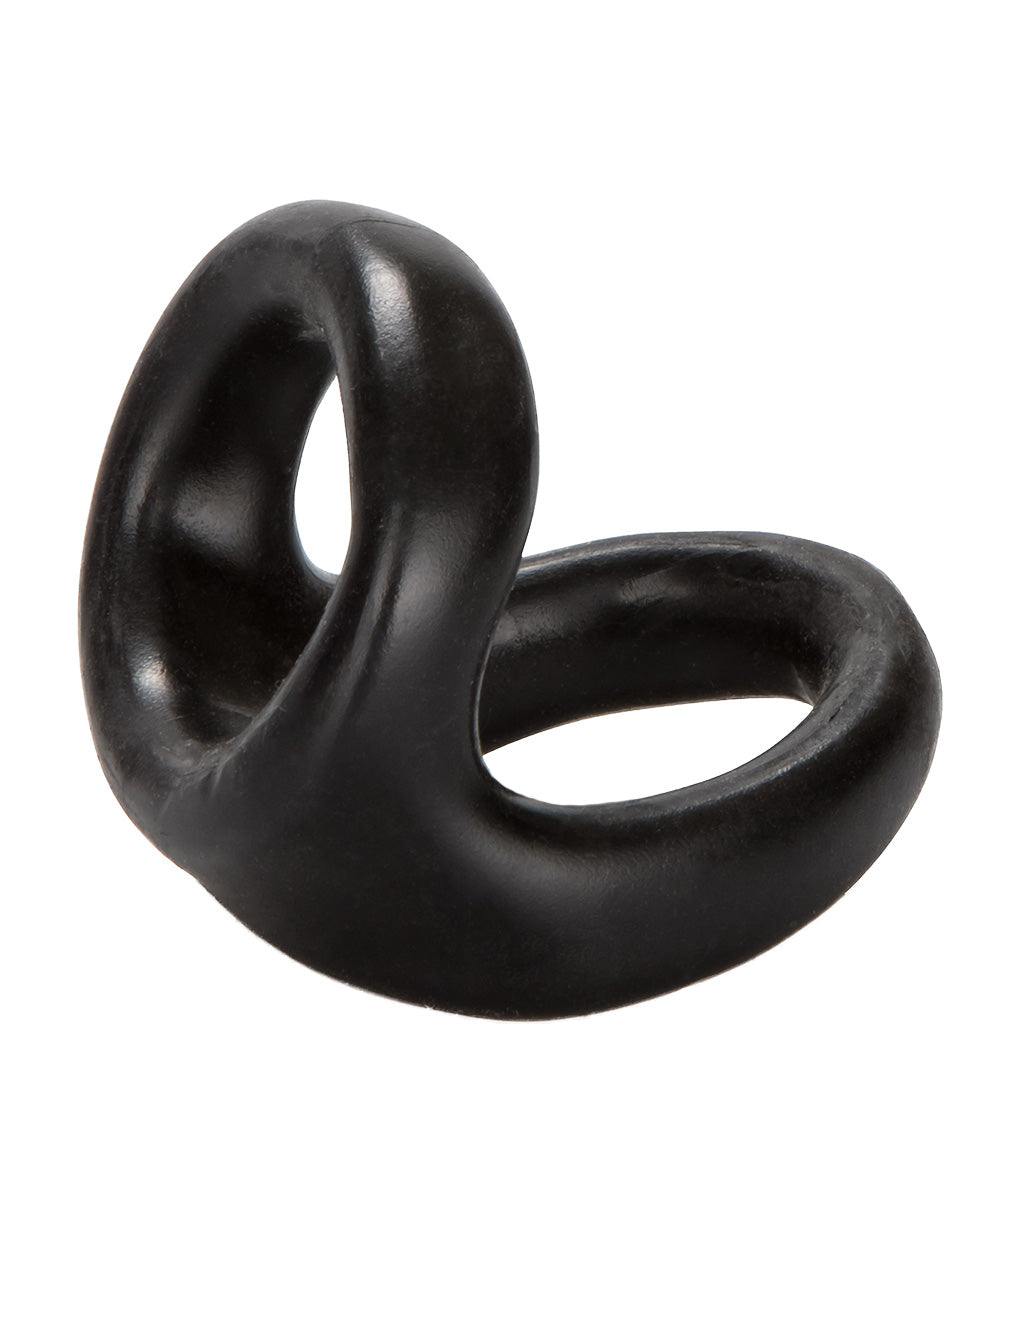 Hustler Playthings Cock and Ball Cockring - Novelties - Cockring